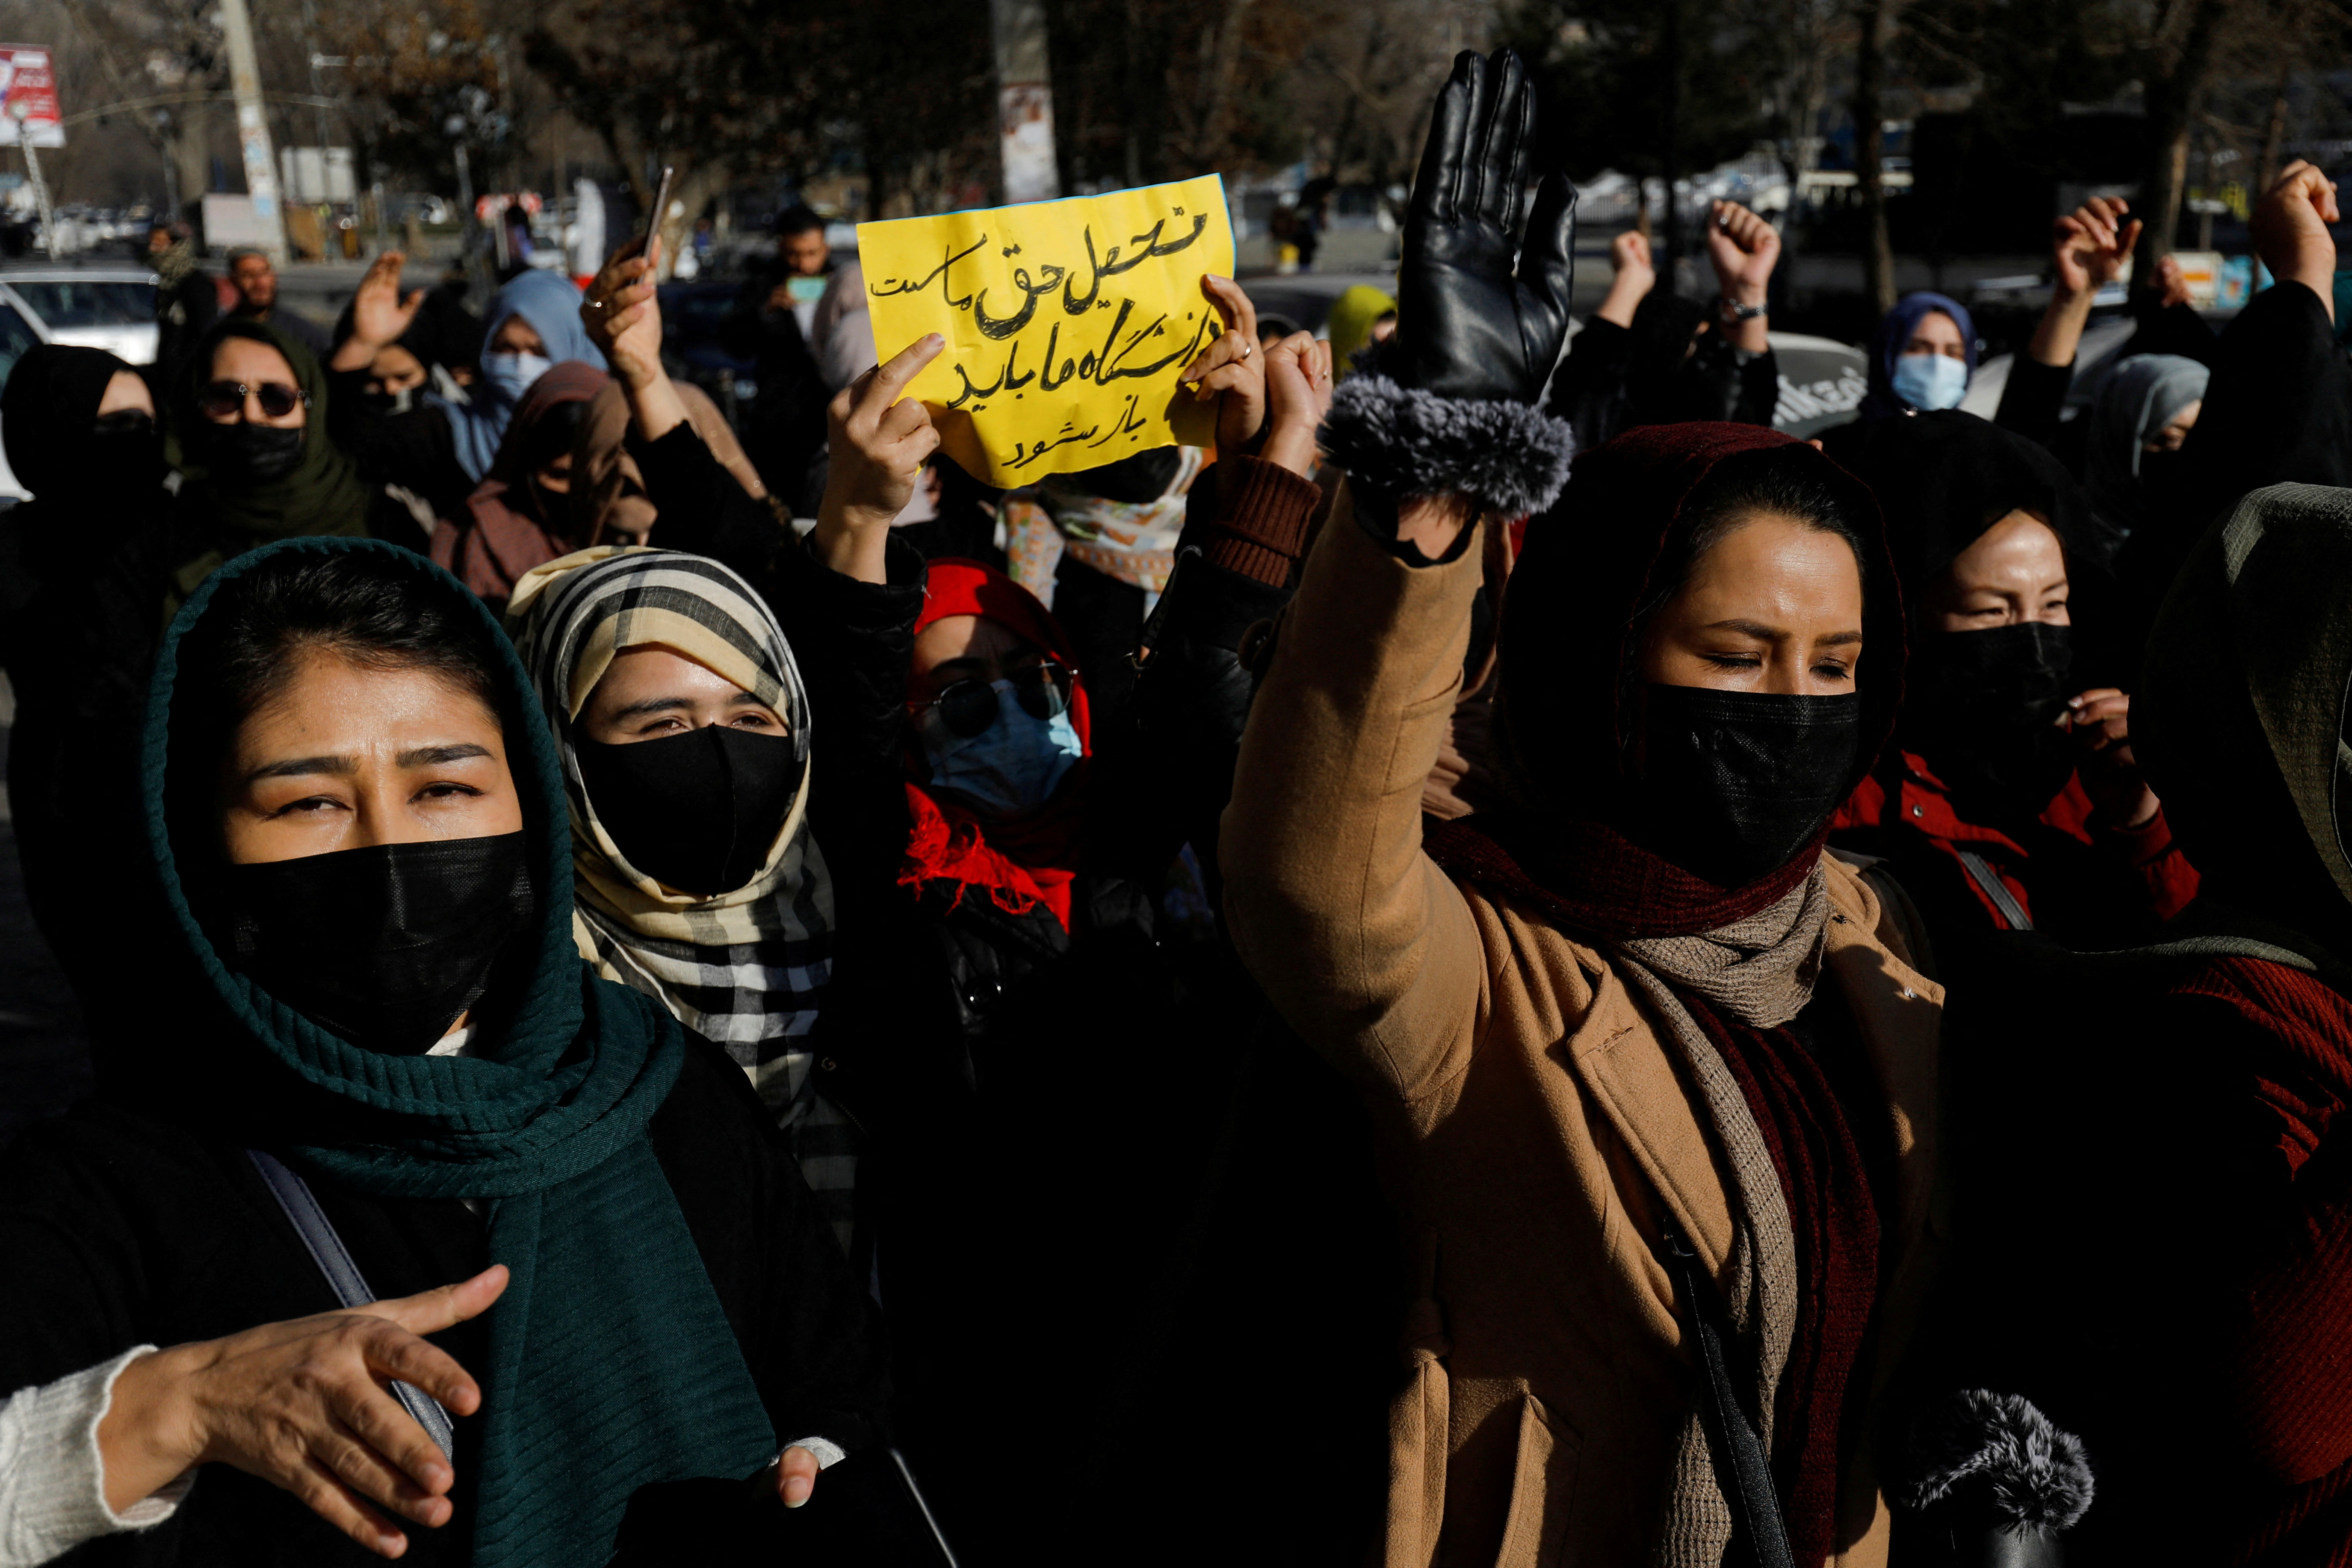 Afghan women chant slogans in protest against the closure of universities to women by the Taliban in Kabul